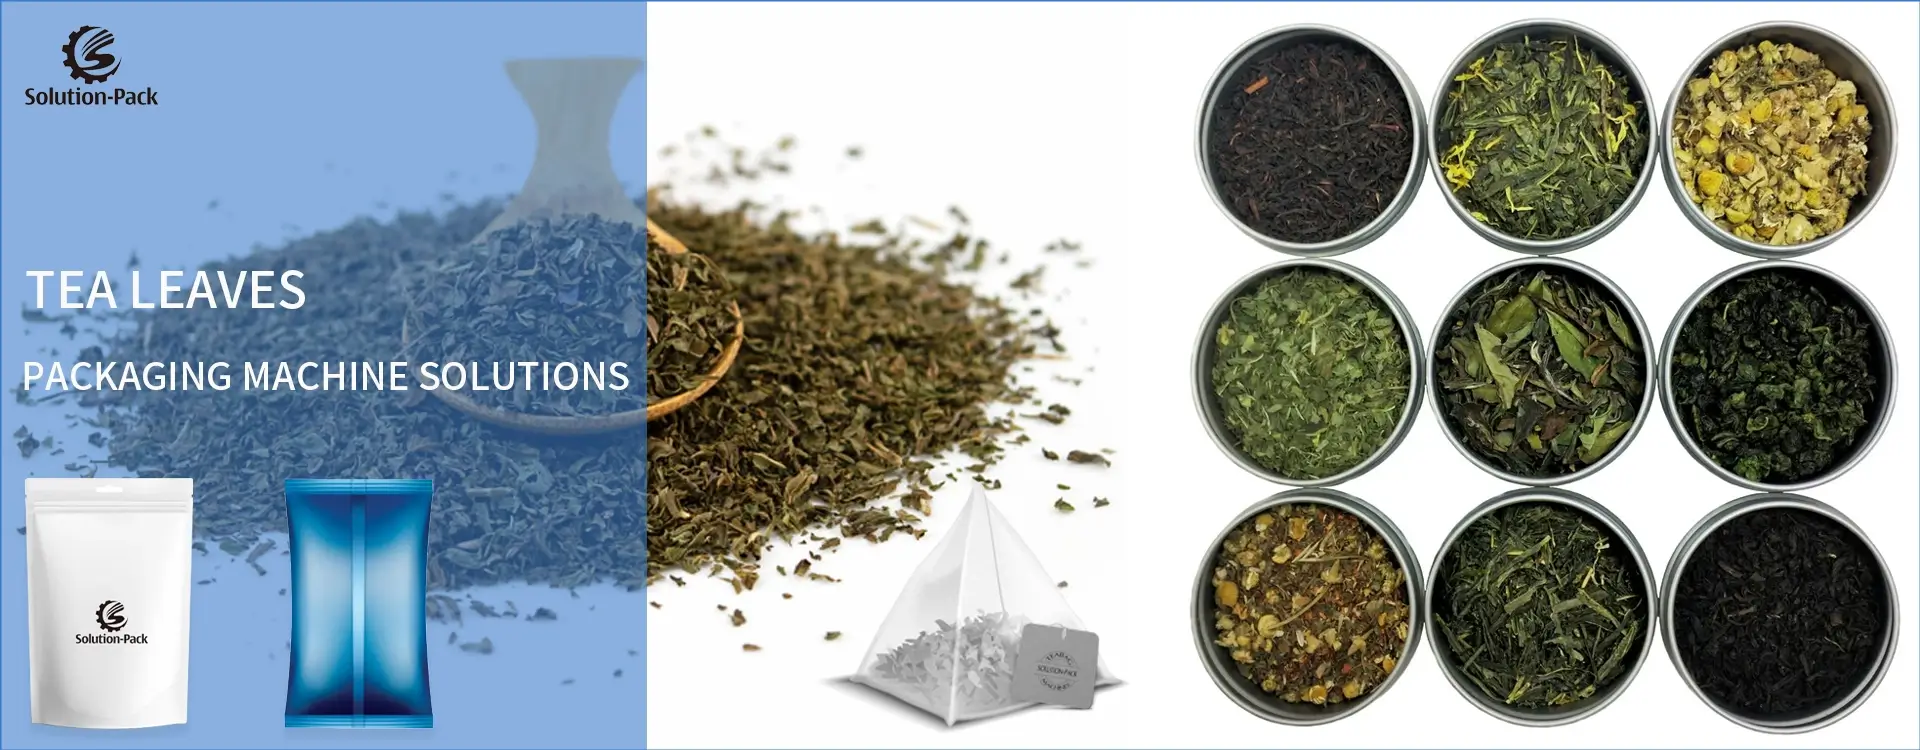 (Solution-Pack) Tea Leaves Automatic Packaging Machine Solutions Heading Banner Picture